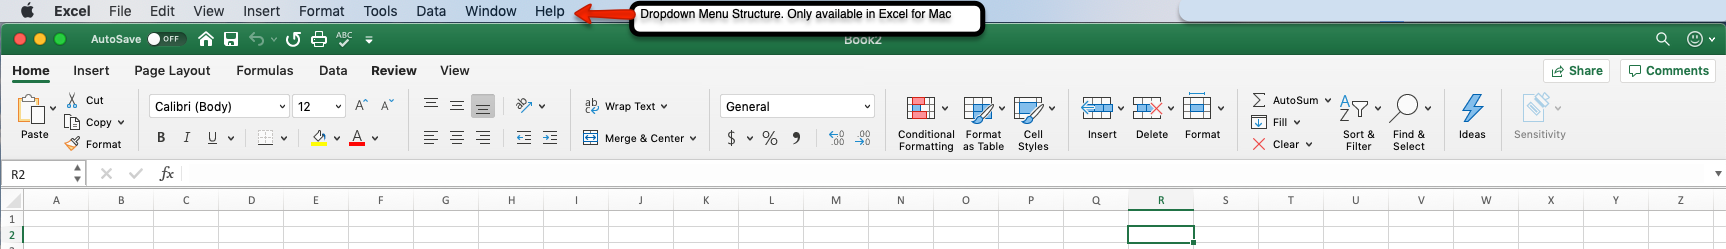 change the back stage title for excel on mac